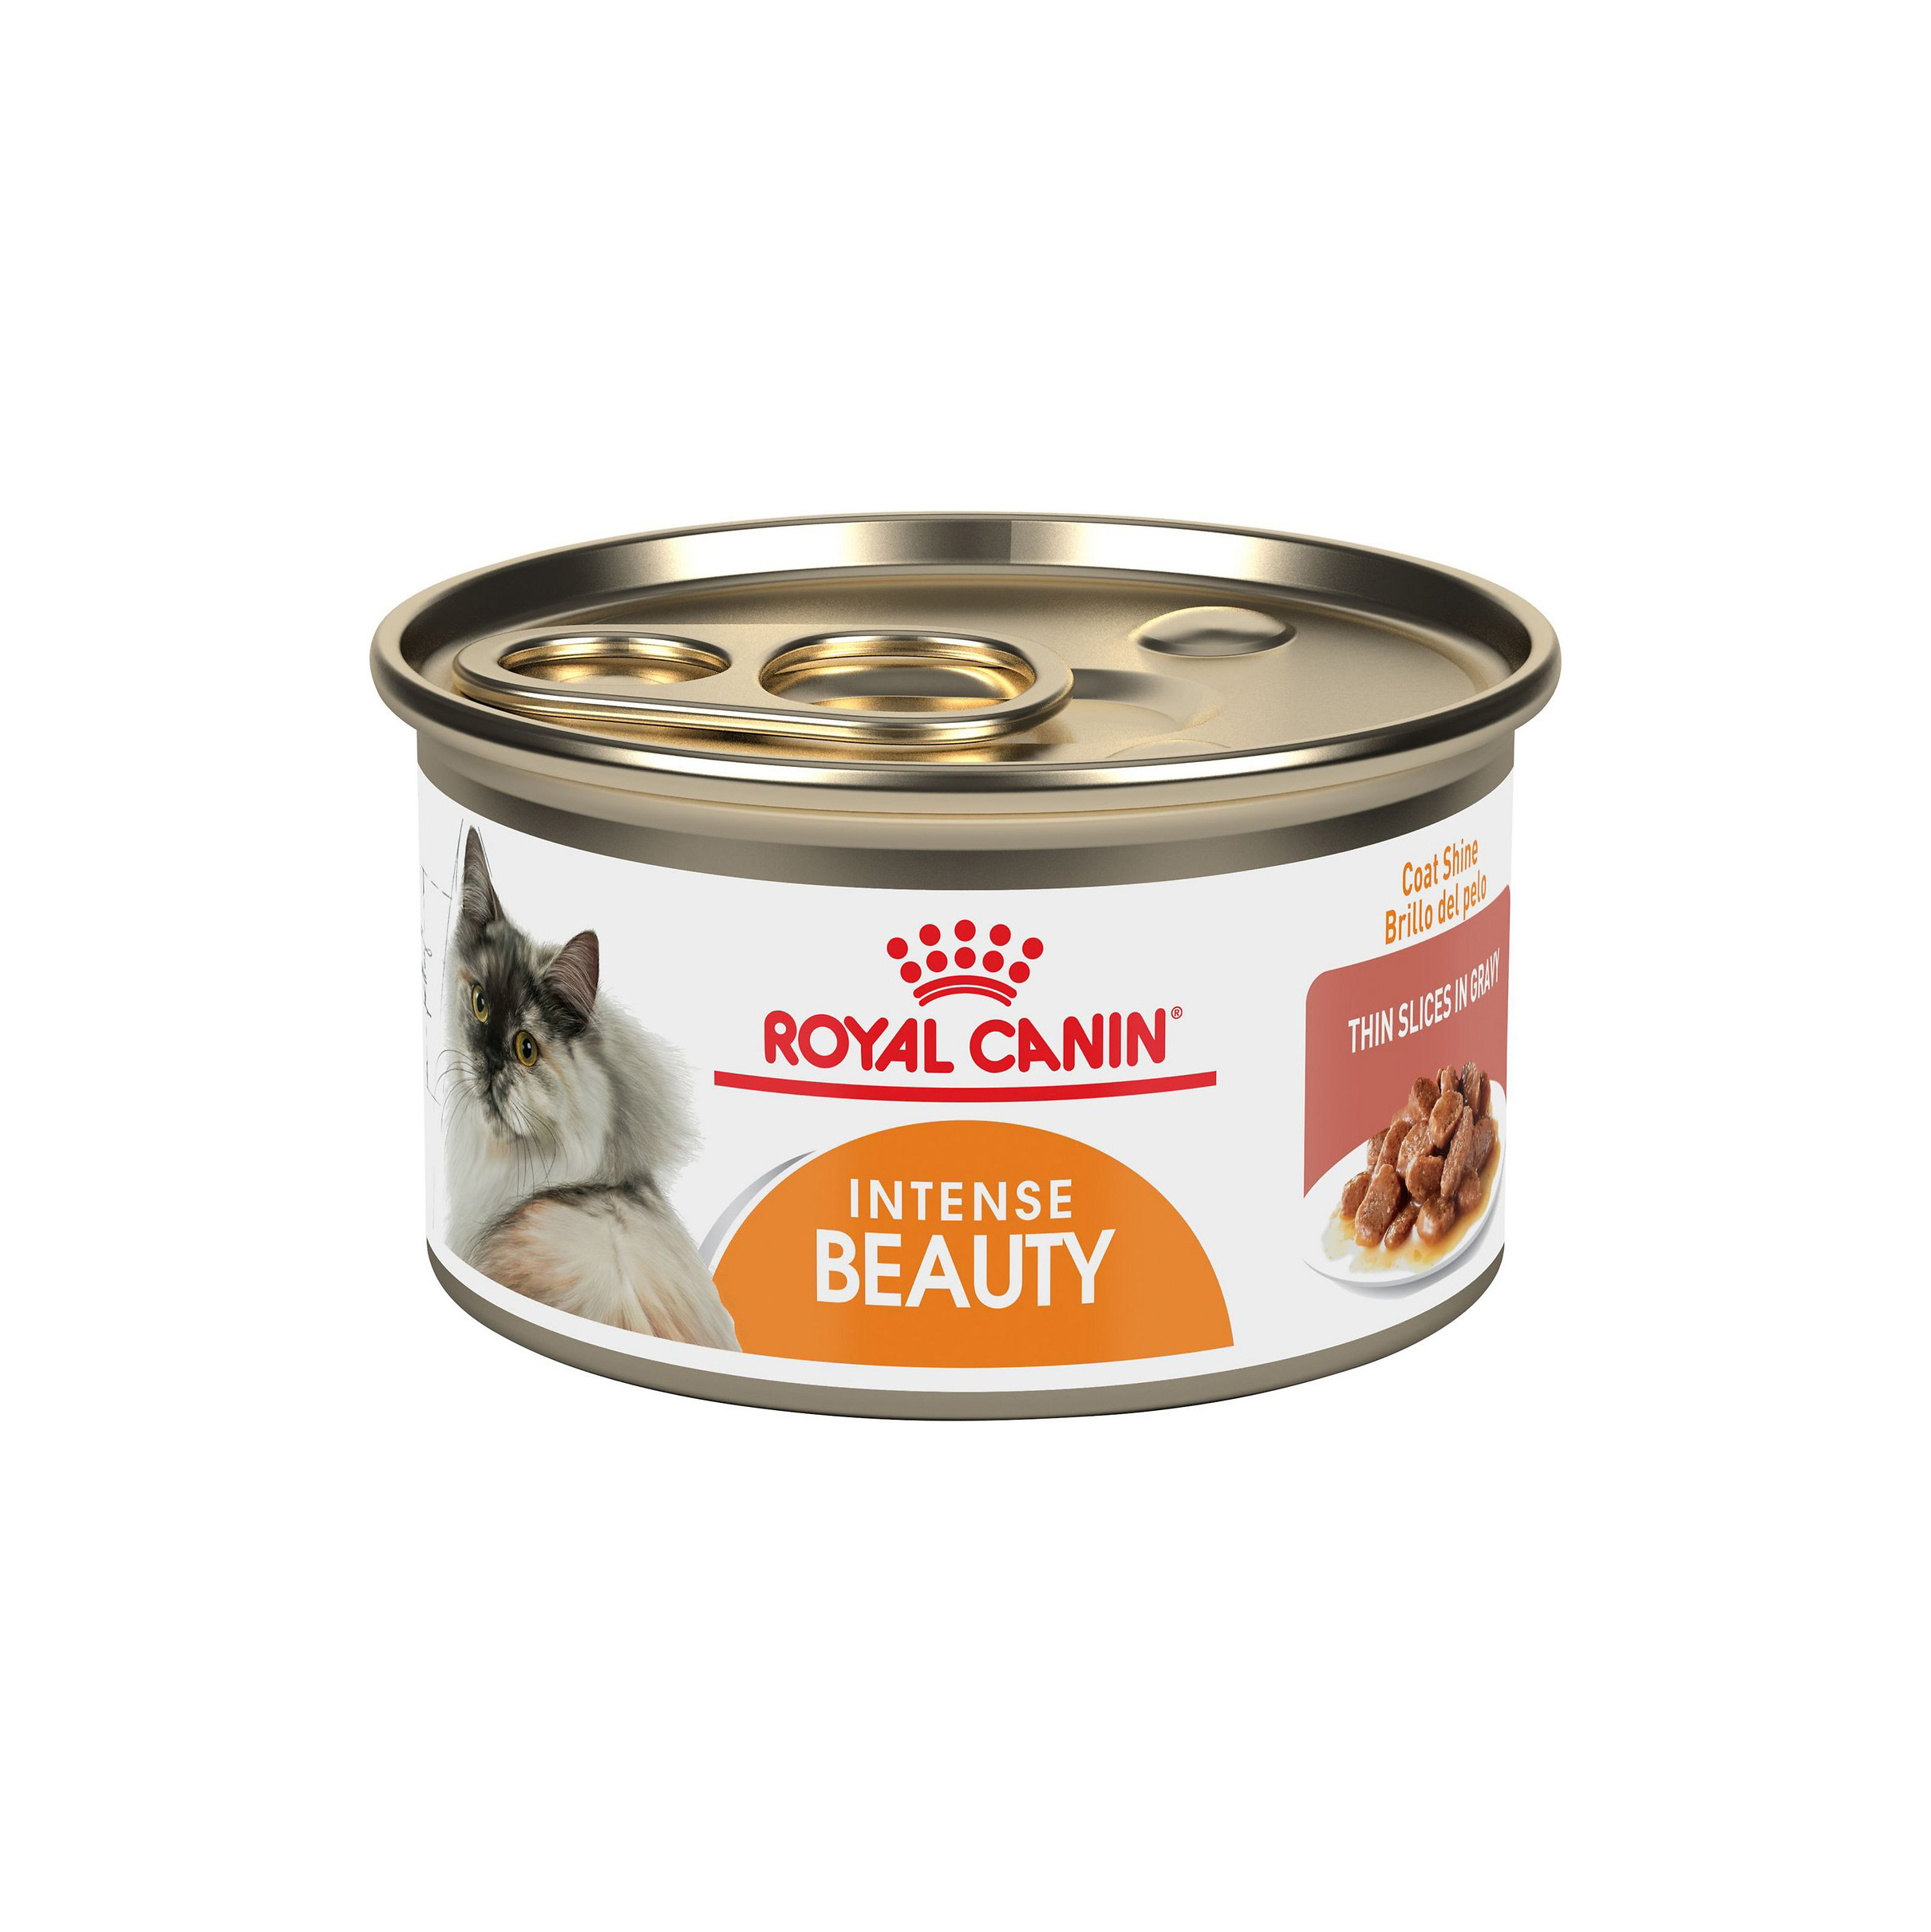 Royal Canin Intense Beauty Thin Slices in Gravy, Canned Cat Food, 3 oz